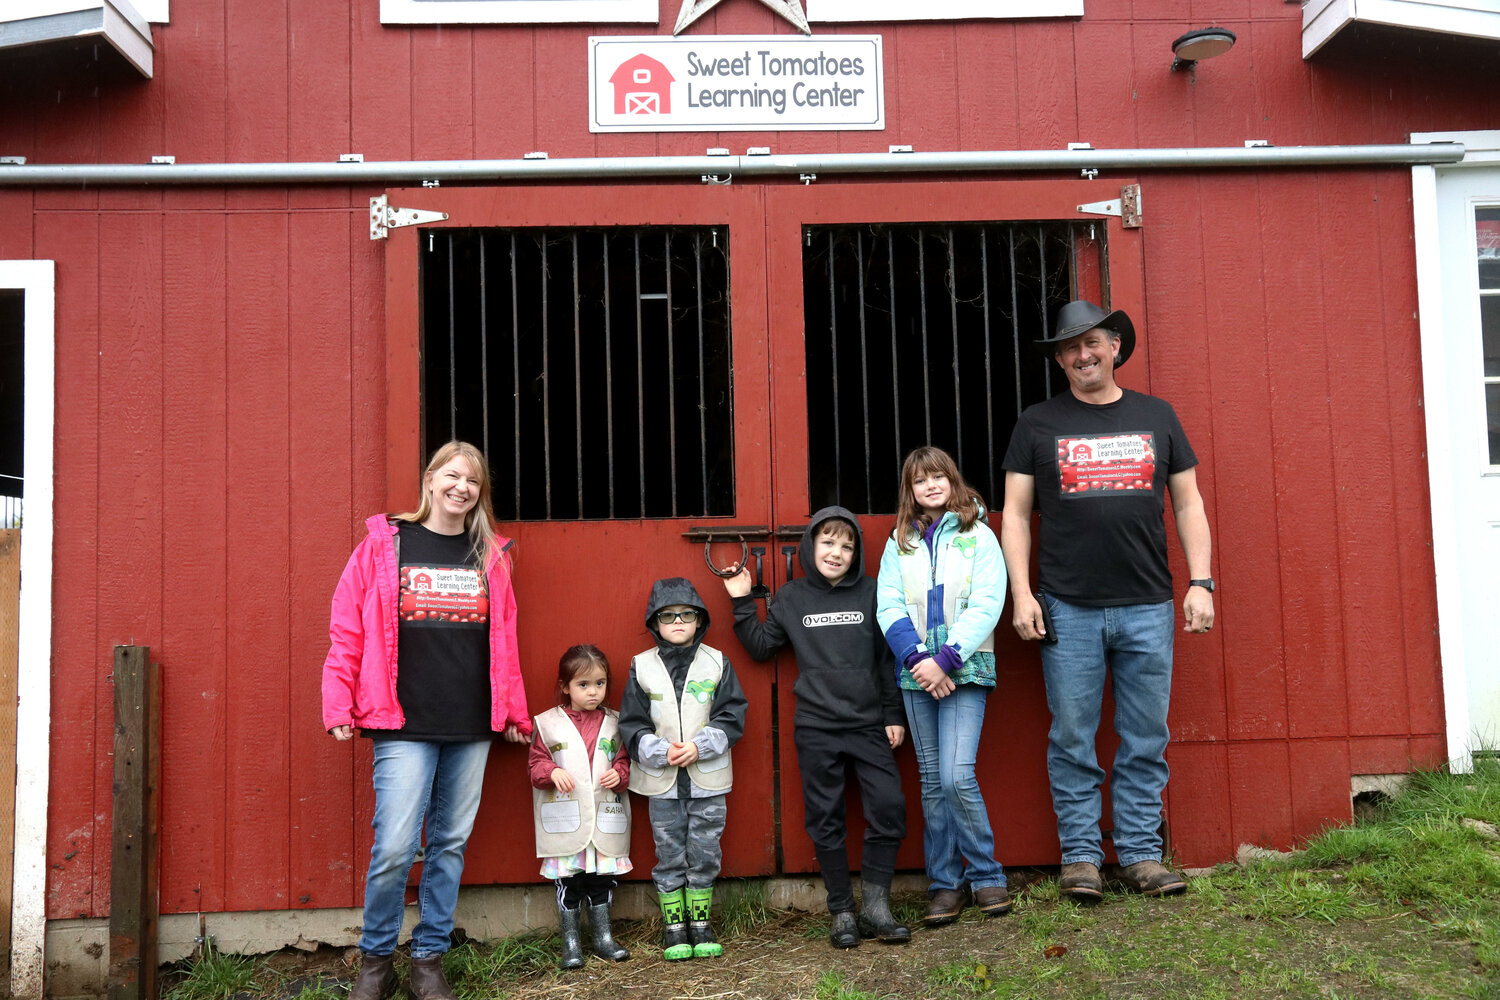 Sweet Tomatoes Learning Center Executive Director Kathleen Reed and her husband Tom Reed stand with students Maya, 4, Owen, 5, Camden, 7, and Lyla, 10, at the learning center in Chehalis on Wednesday, Dec. 6.